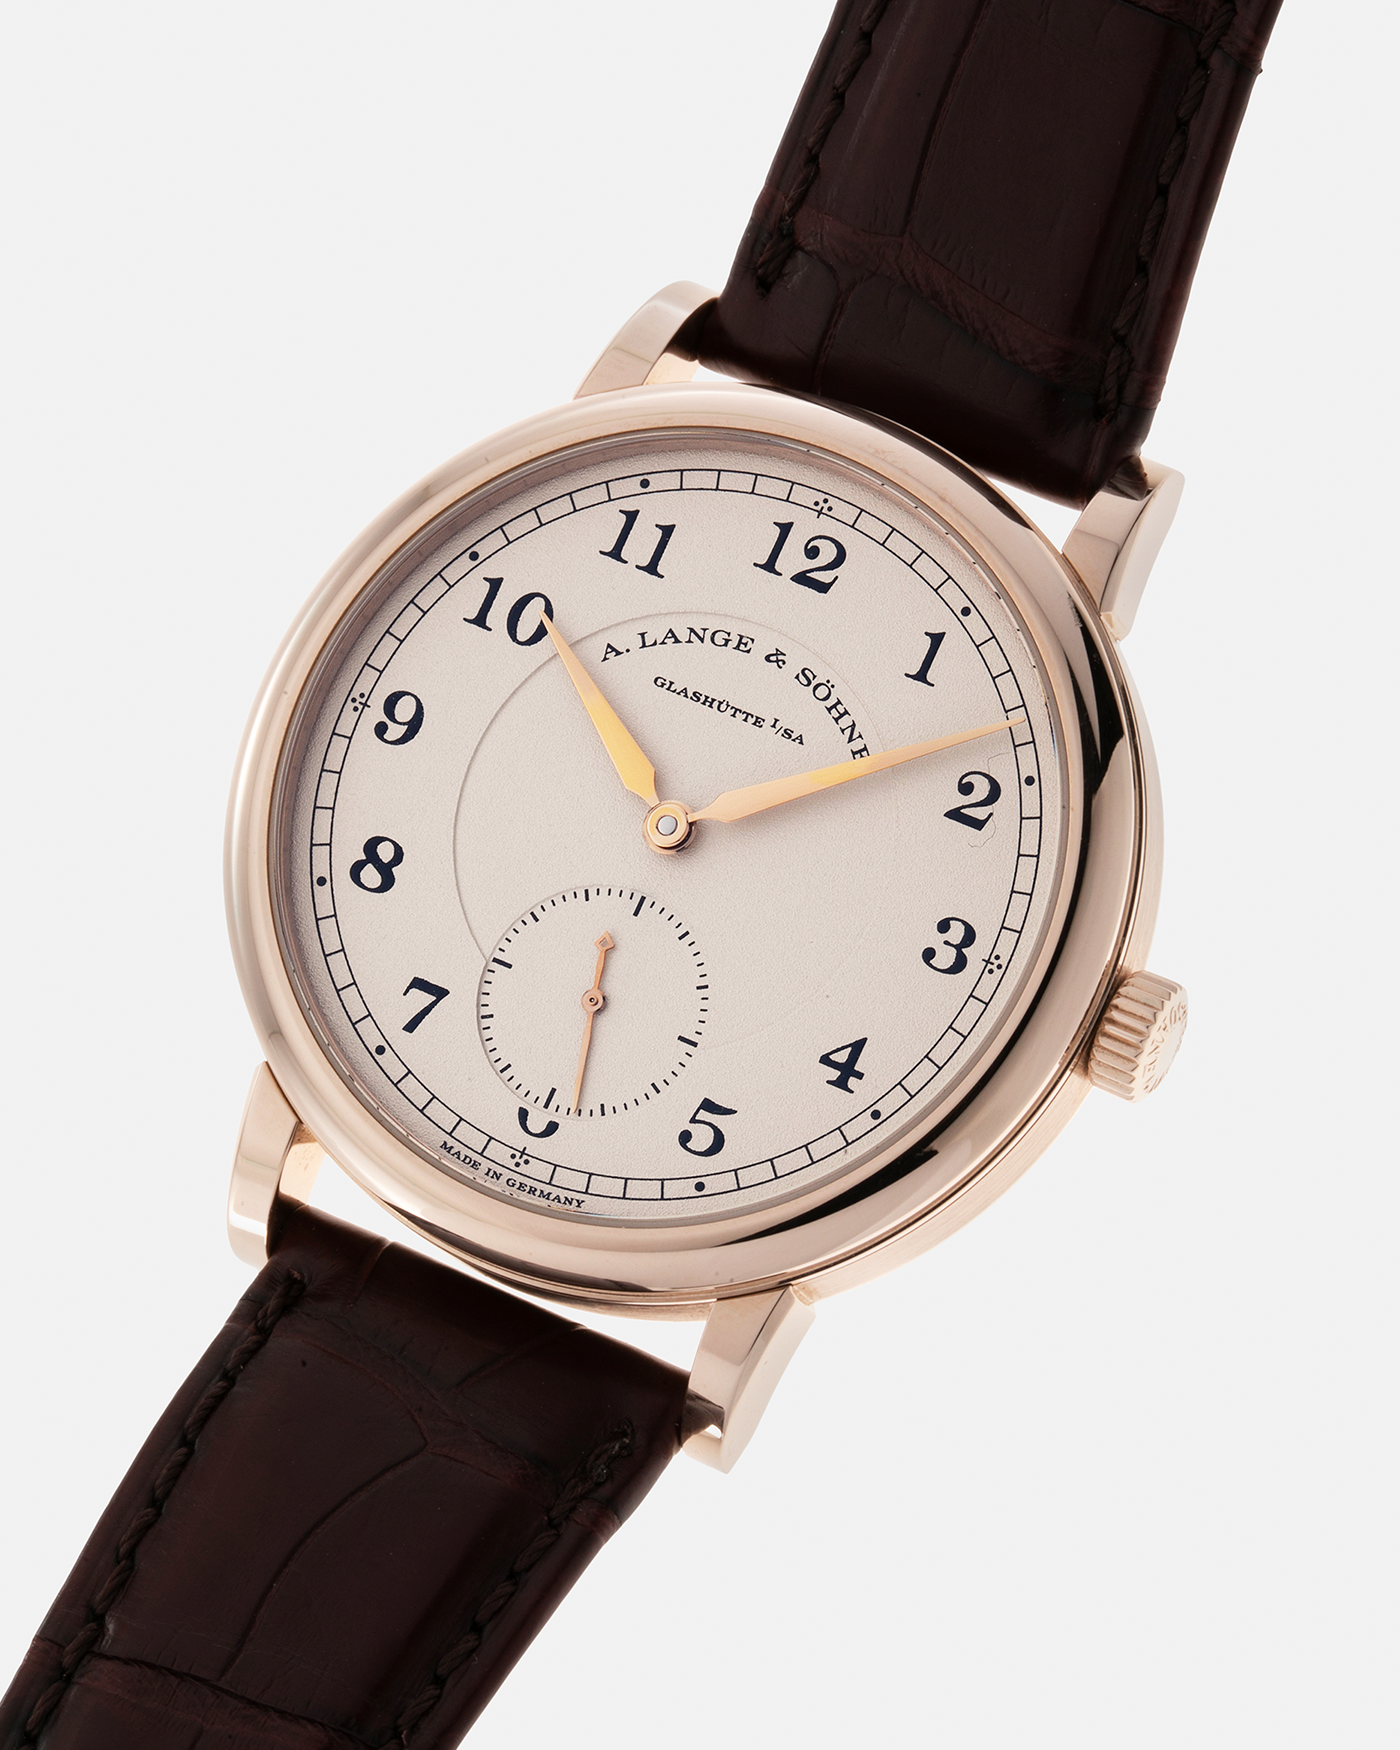 Brand: A. Lange & Söhne Year: 2015 Model: 1815 200th Anniversary F. A. Lange, Limited Edition of 200 pieces Ref Number: 236.050 Material: Honey Gold Movement: A. Lange & Söhne Cal. L051.1, Manual-Winding Case Diameter: 40mm Strap: A. Lange & Söhne Brown Alligator with Signed Honey Gold Tang Buckle